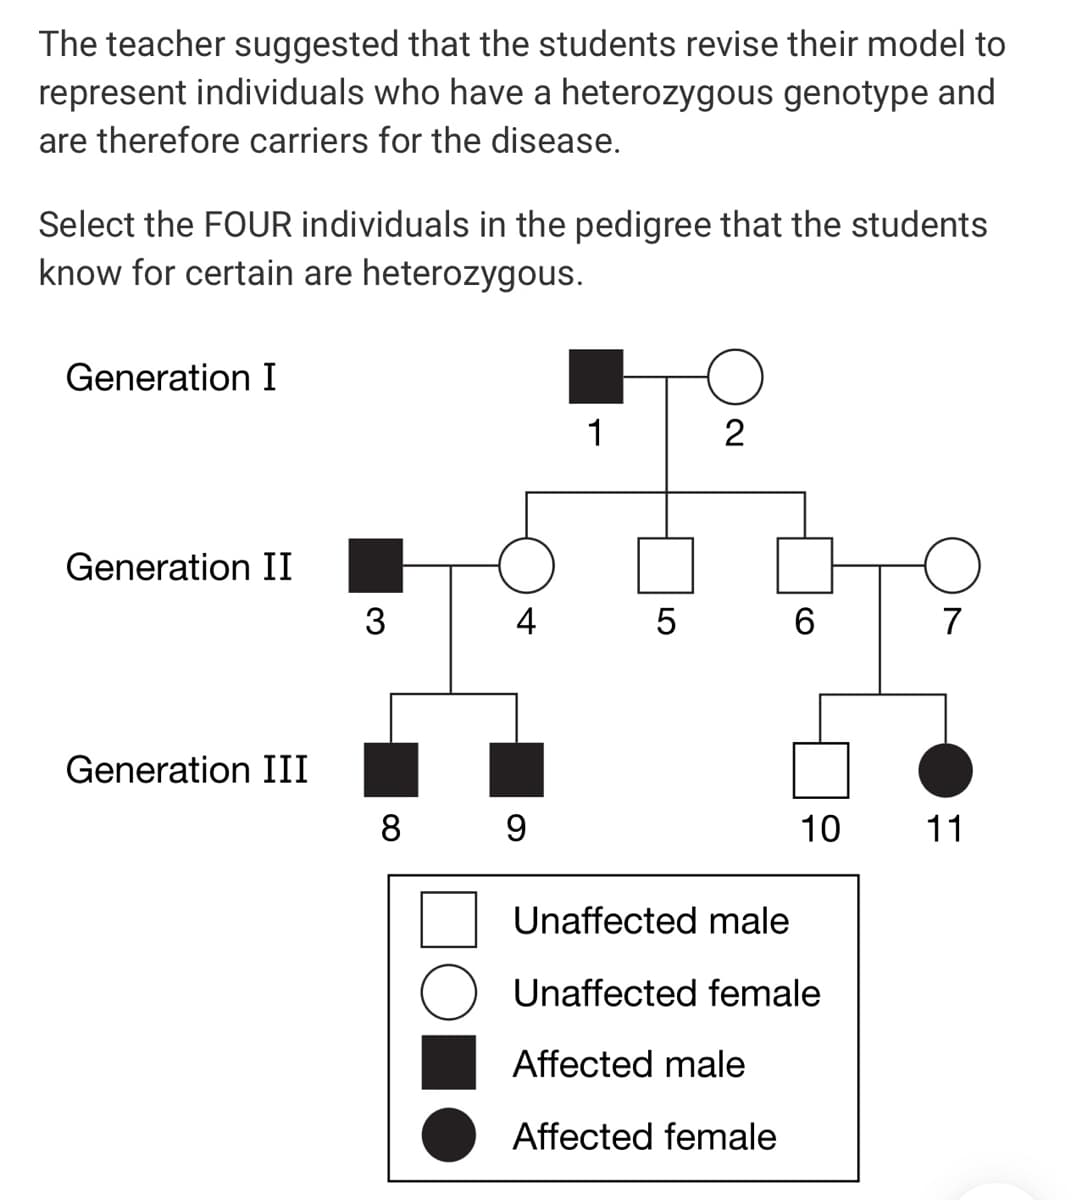 The teacher suggested that the students revise their model to
represent individuals who have a heterozygous genotype and
are therefore carriers for the disease.
Select the FOUR individuals in the pedigree that the students
know for certain are heterozygous.
Generation I
1
2
Generation II
4
5
6
Generation III
8
9
10
11
Unaffected male
Unaffected female
Affected male
Affected female
DO
